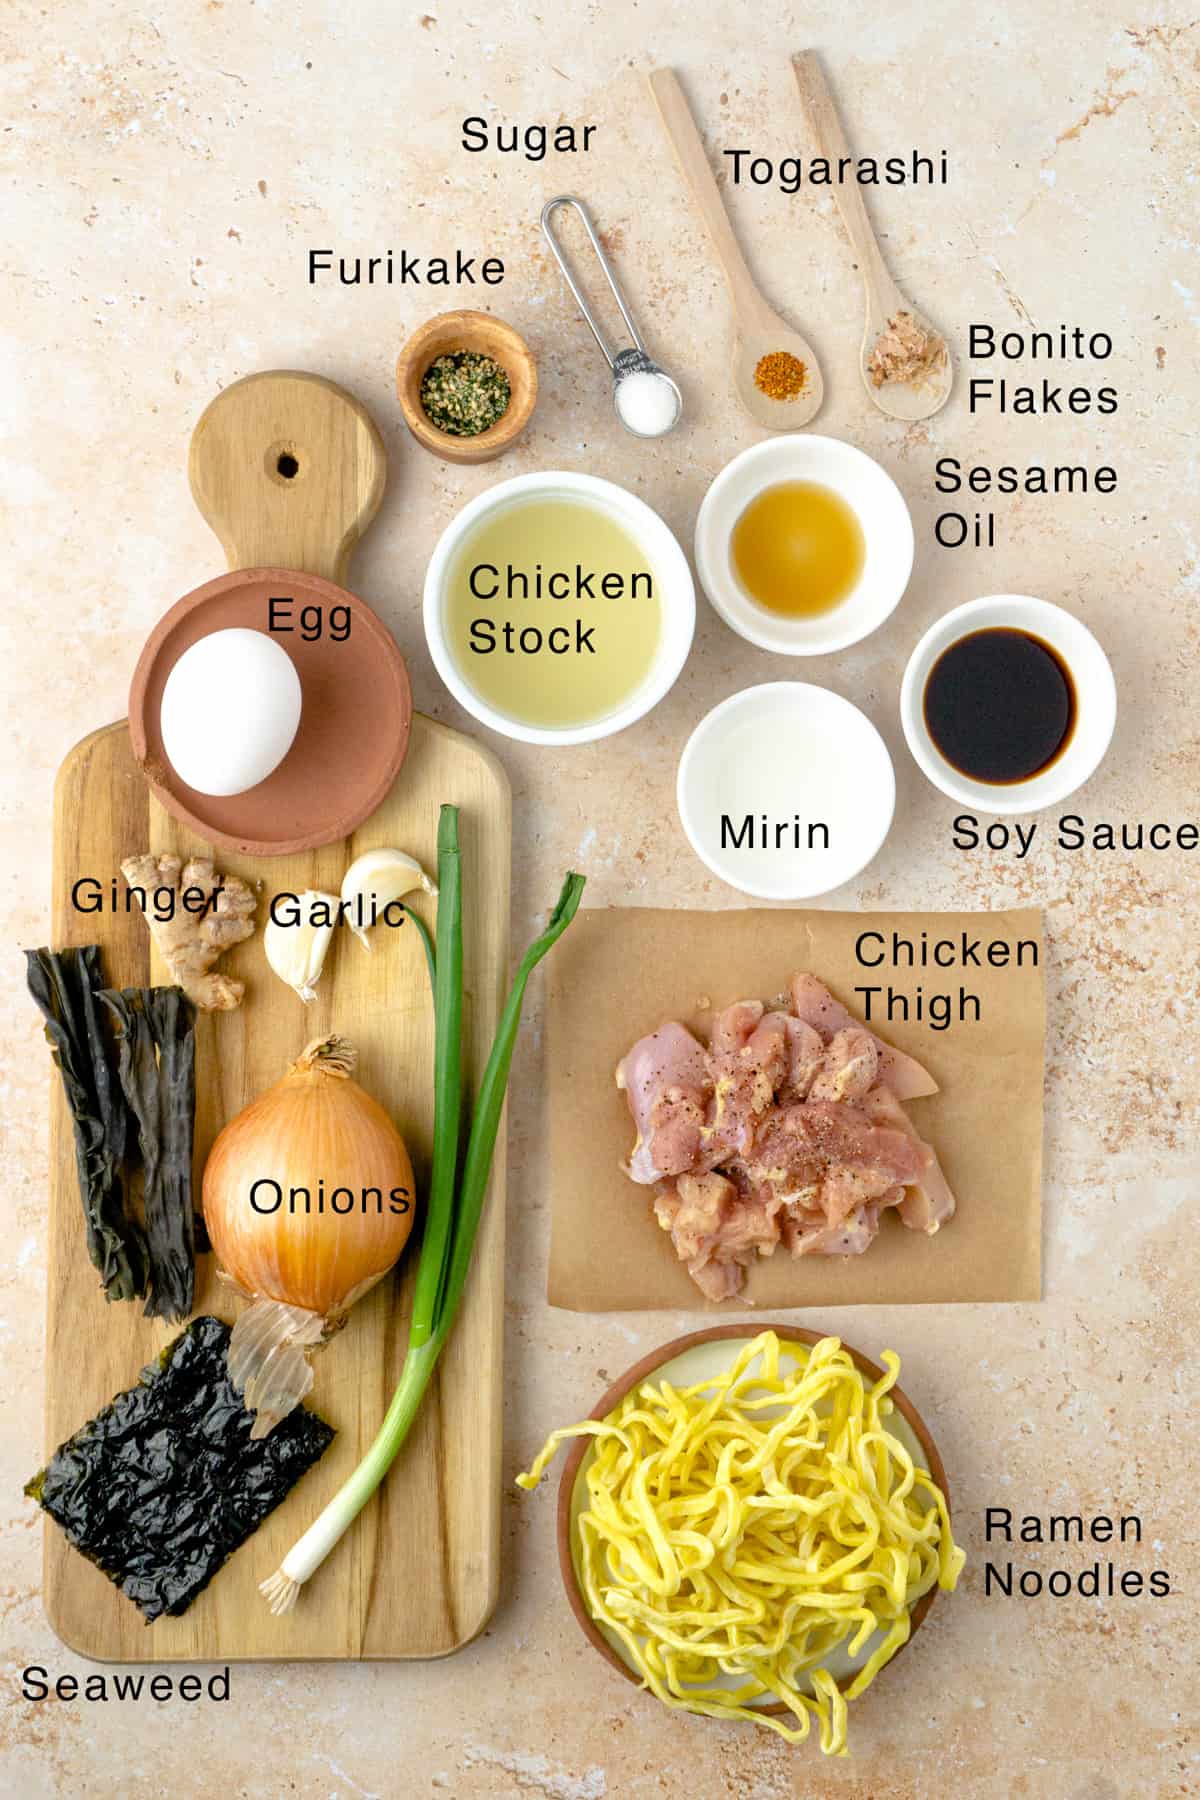 Ingredients for the shoyu ramen laid out on the table.